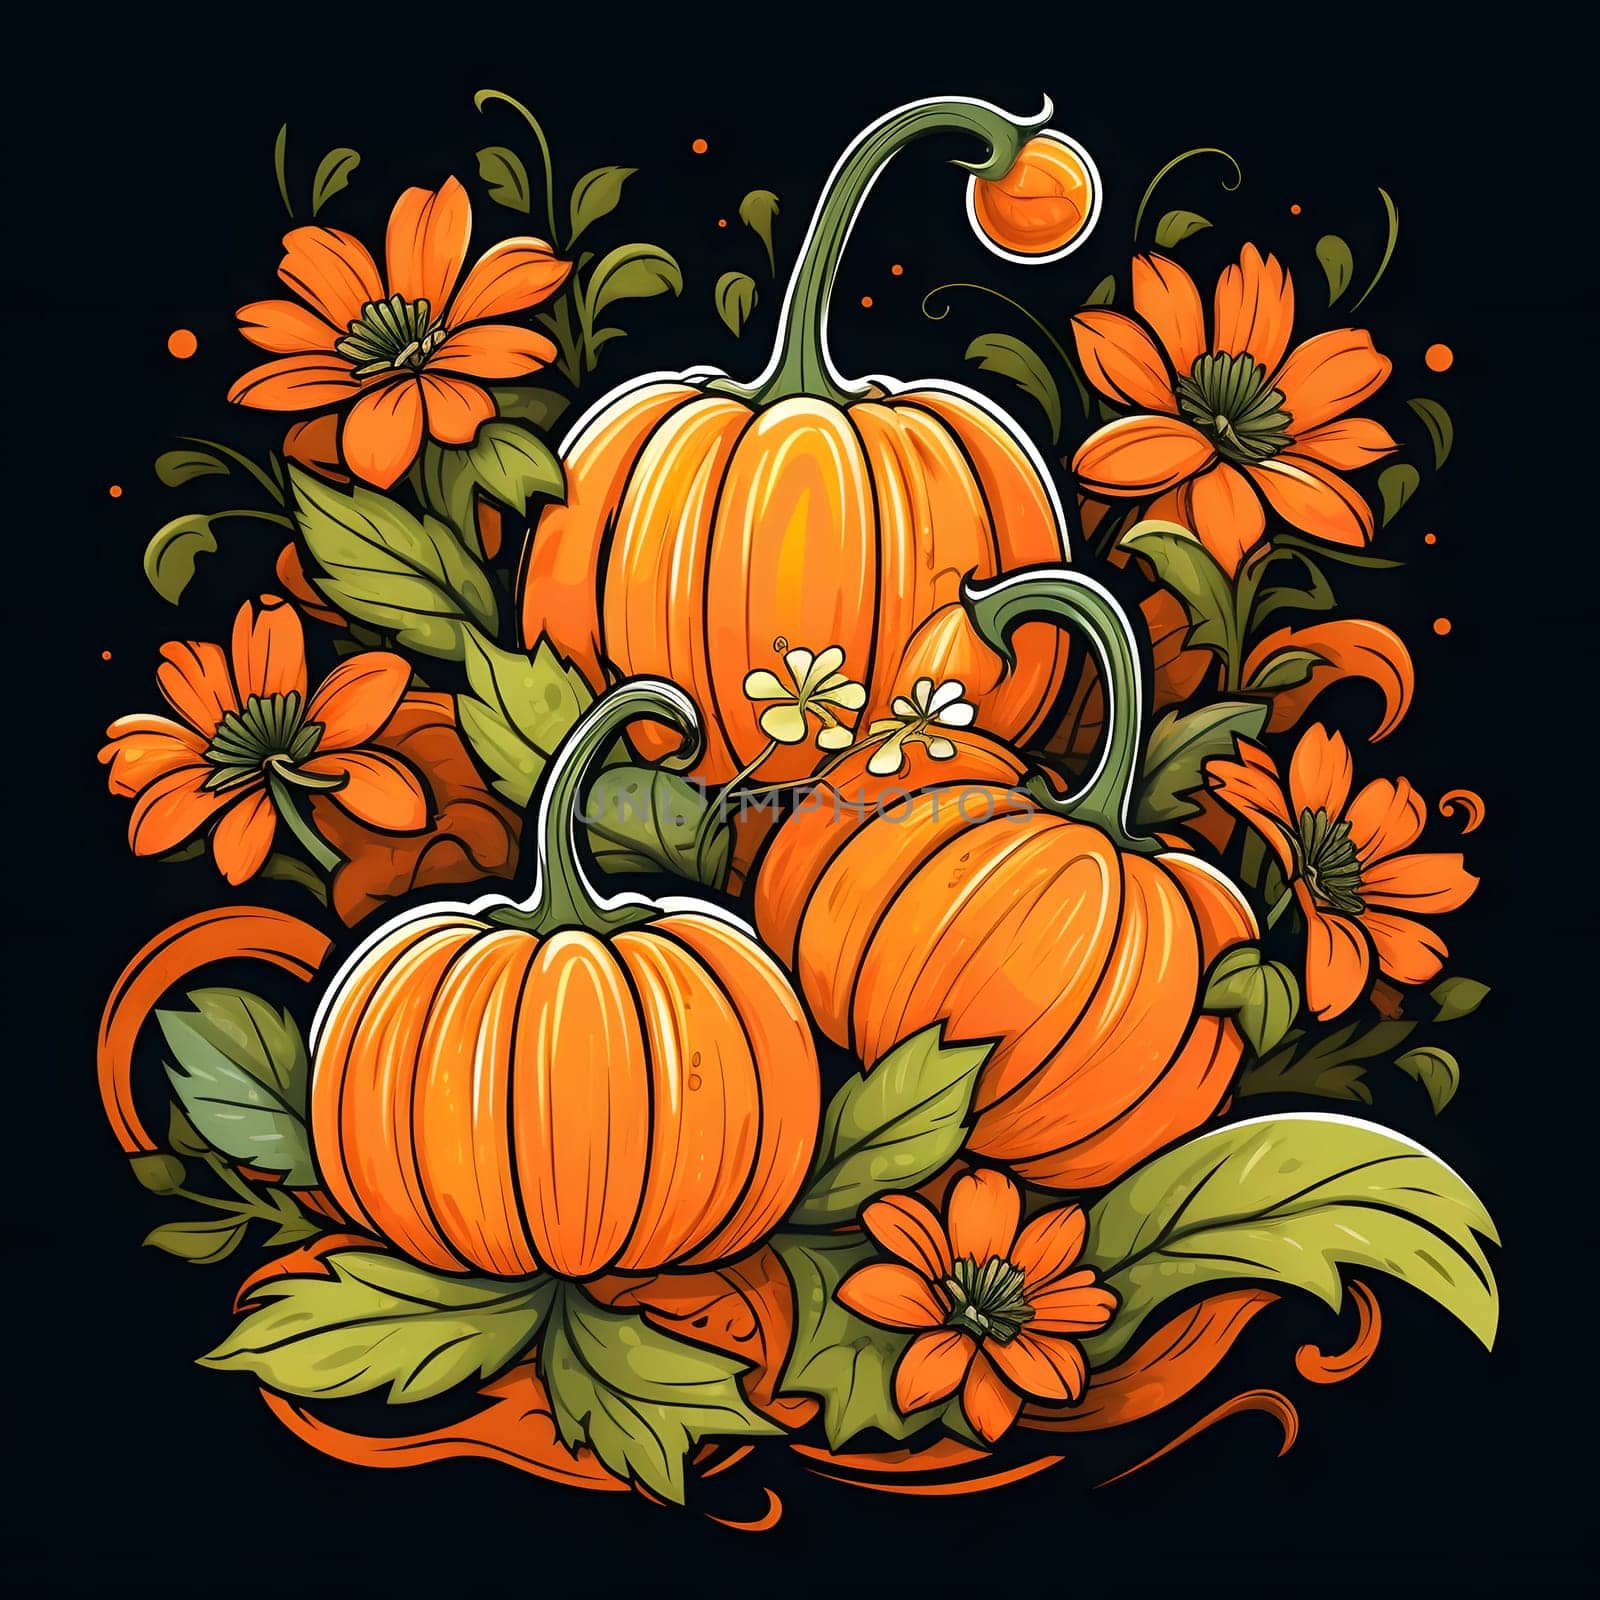 Three pumpkins, leaves and flowers isolated on a black background. Pumpkin as a dish of thanksgiving for the harvest. An atmosphere of joy and celebration.